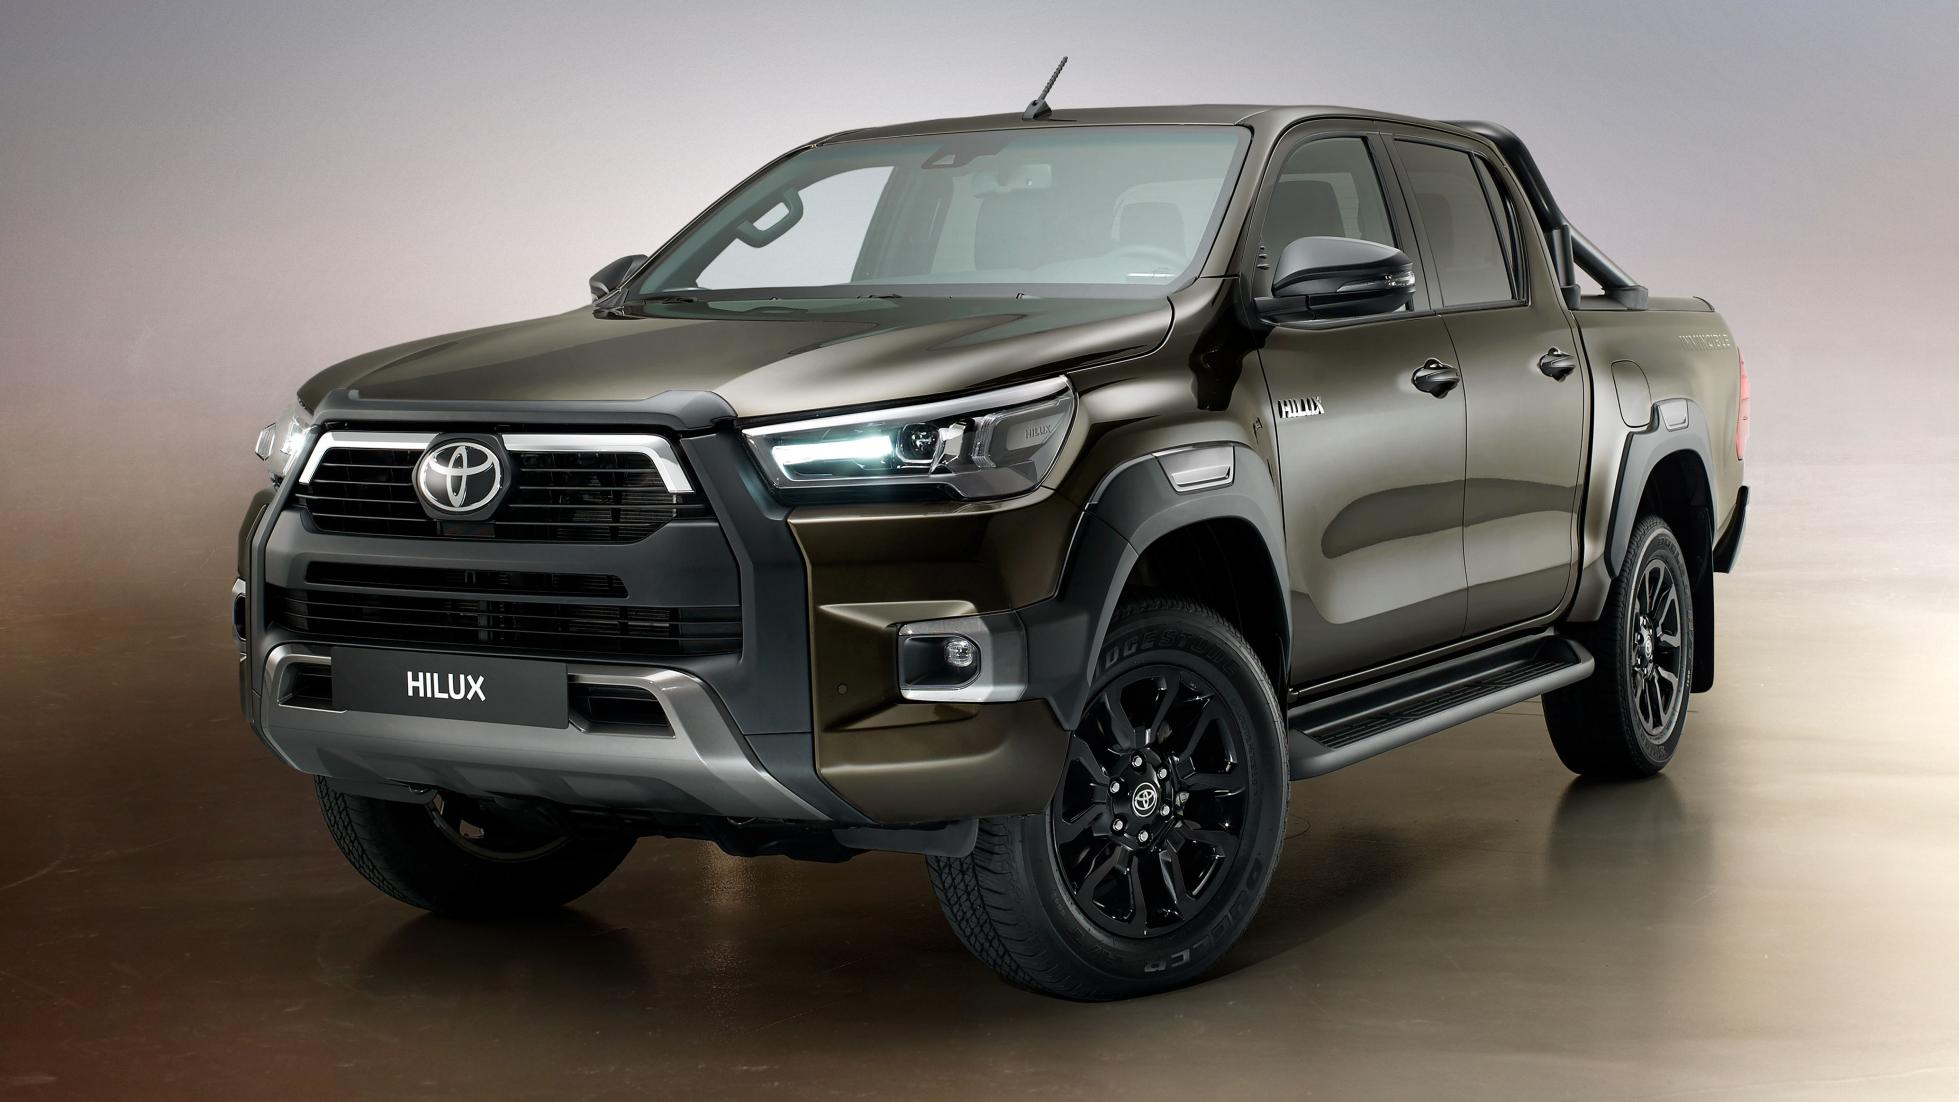 The new Toyota Hilux is here and it has a new engine